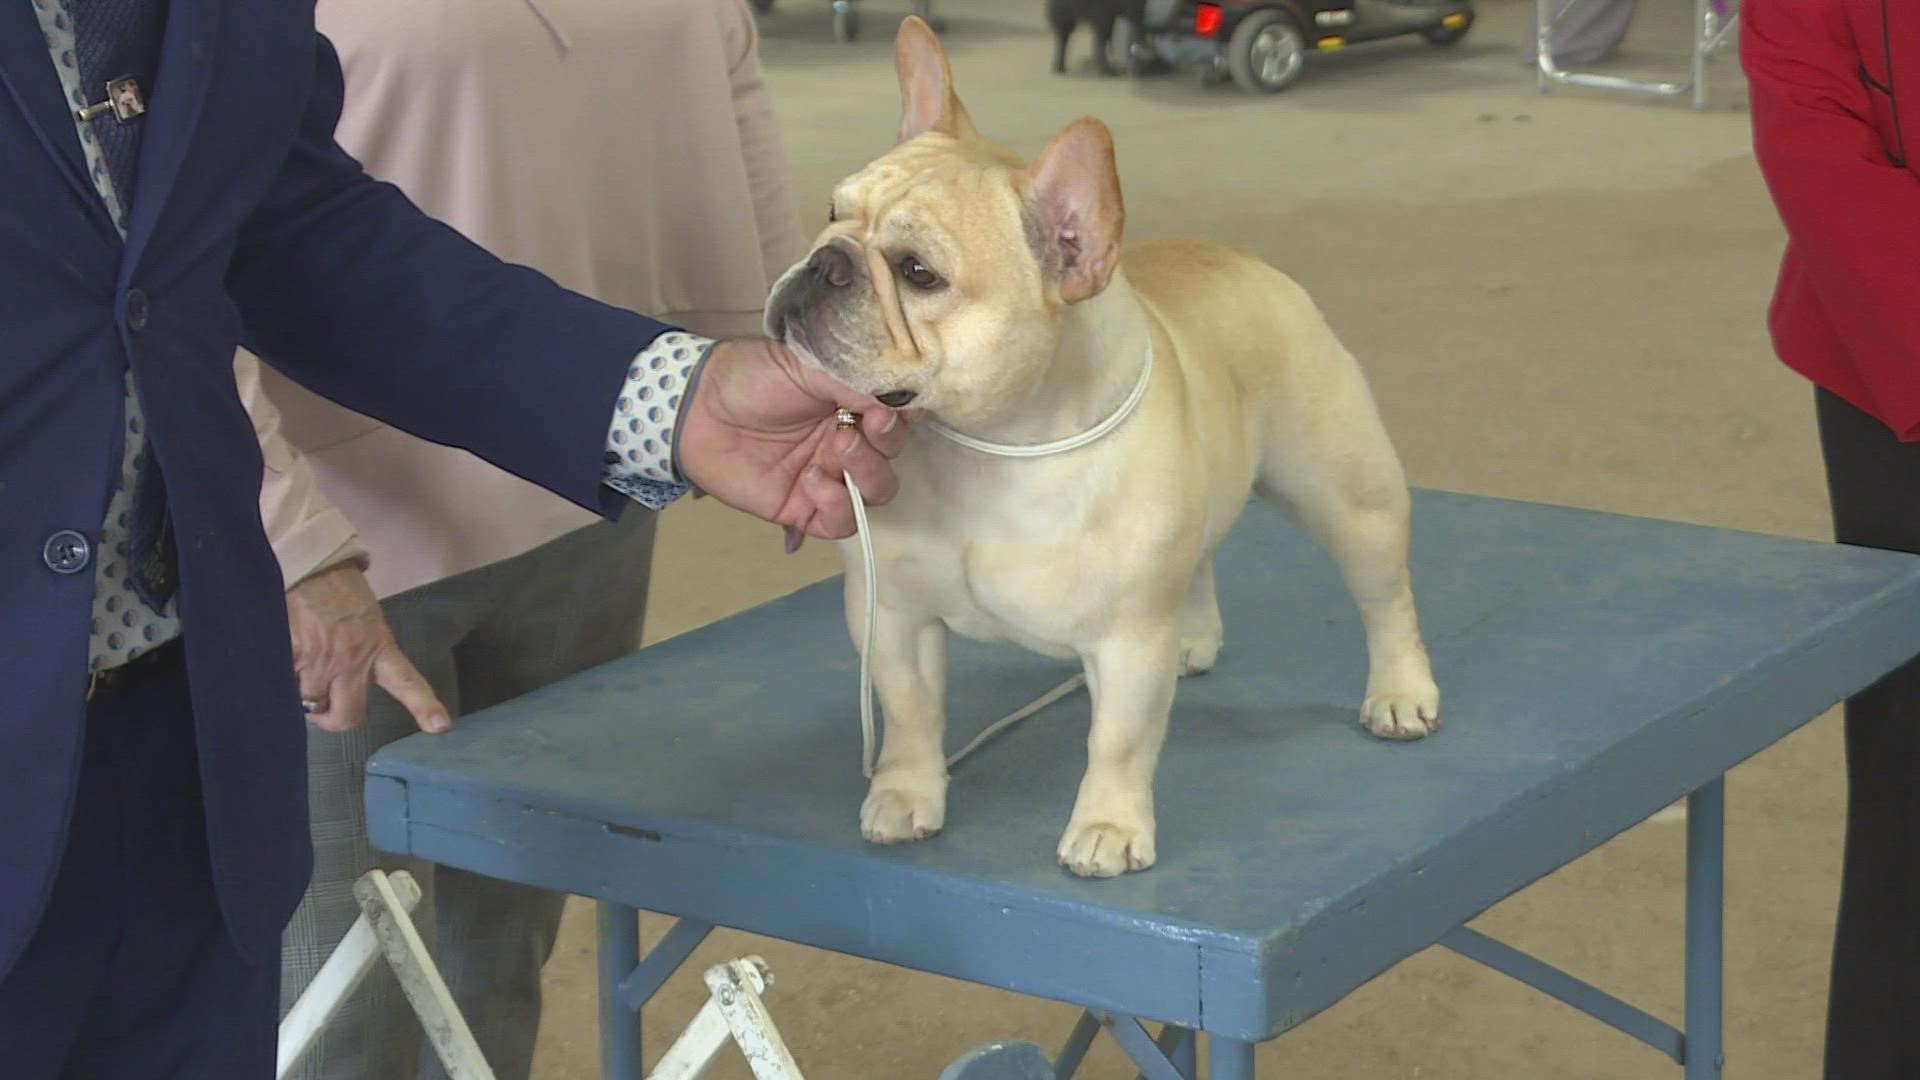 National Dog Show winner makes a stop in Scottsdale